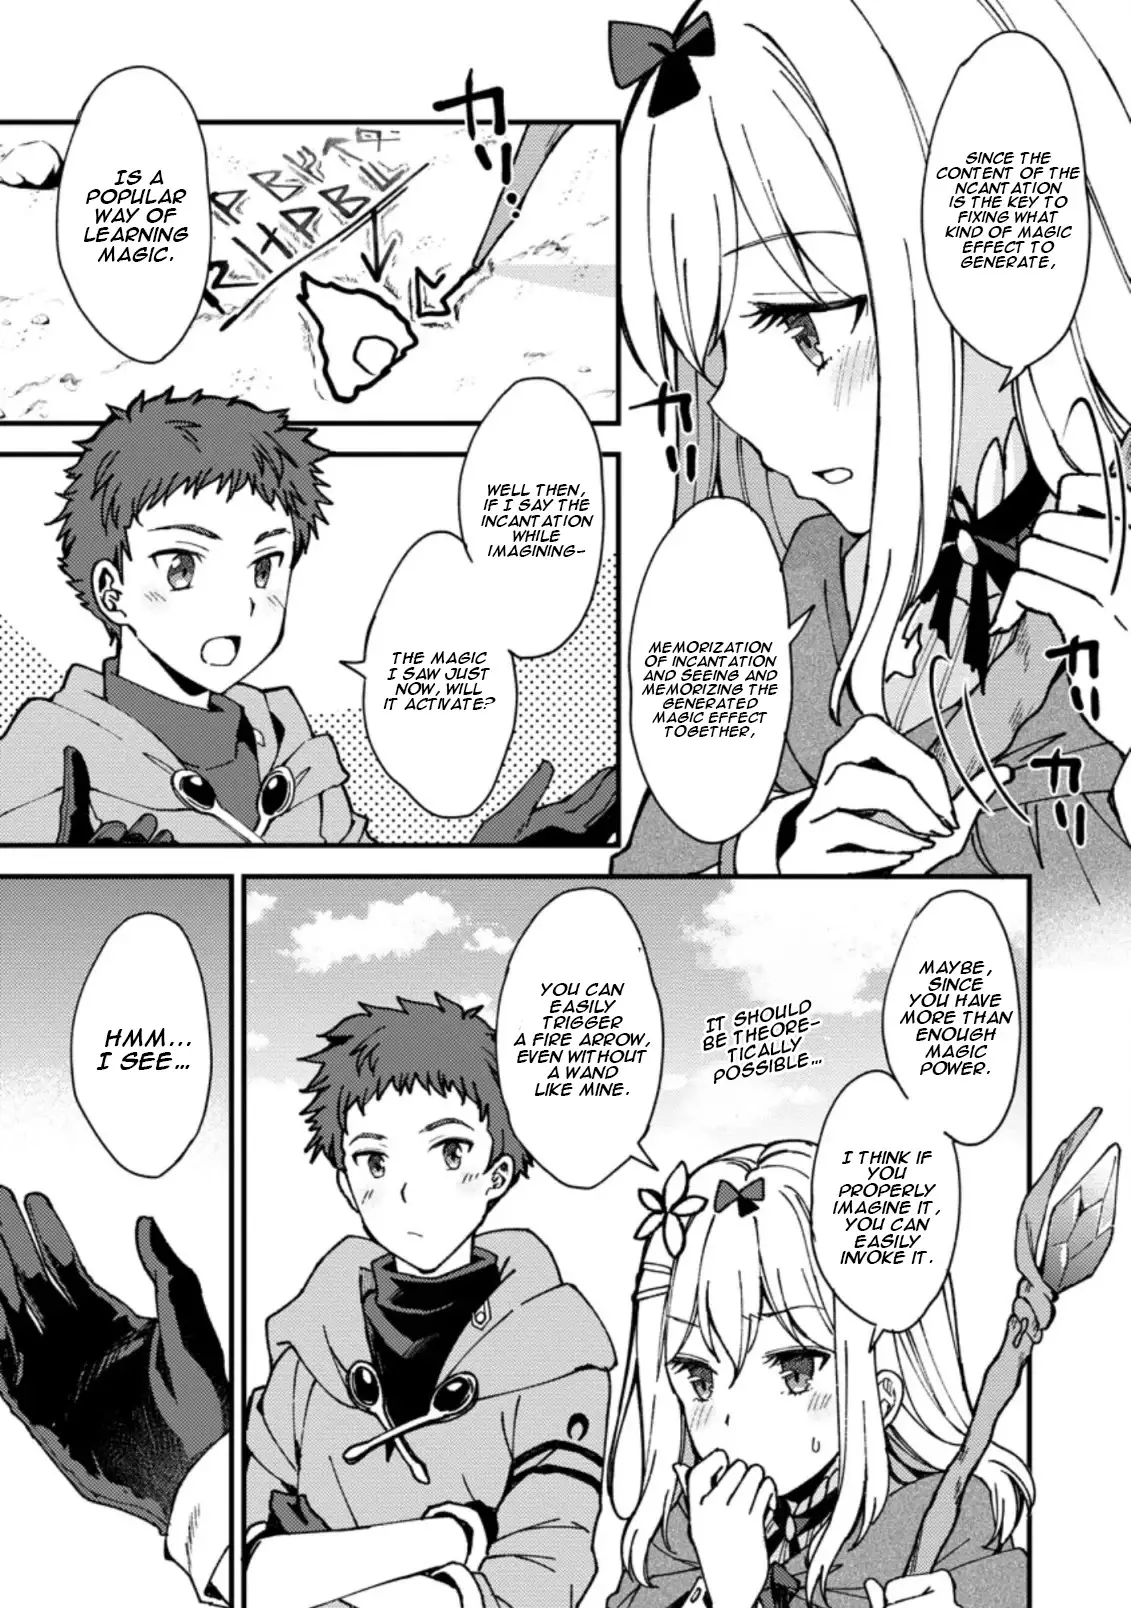 A Sword Master Childhood Friend Power Harassed Me Harshly, So I Broke Off Our Relationship And Make A Fresh Start At The Frontier As A Magic Swordsman. - 3 page 24